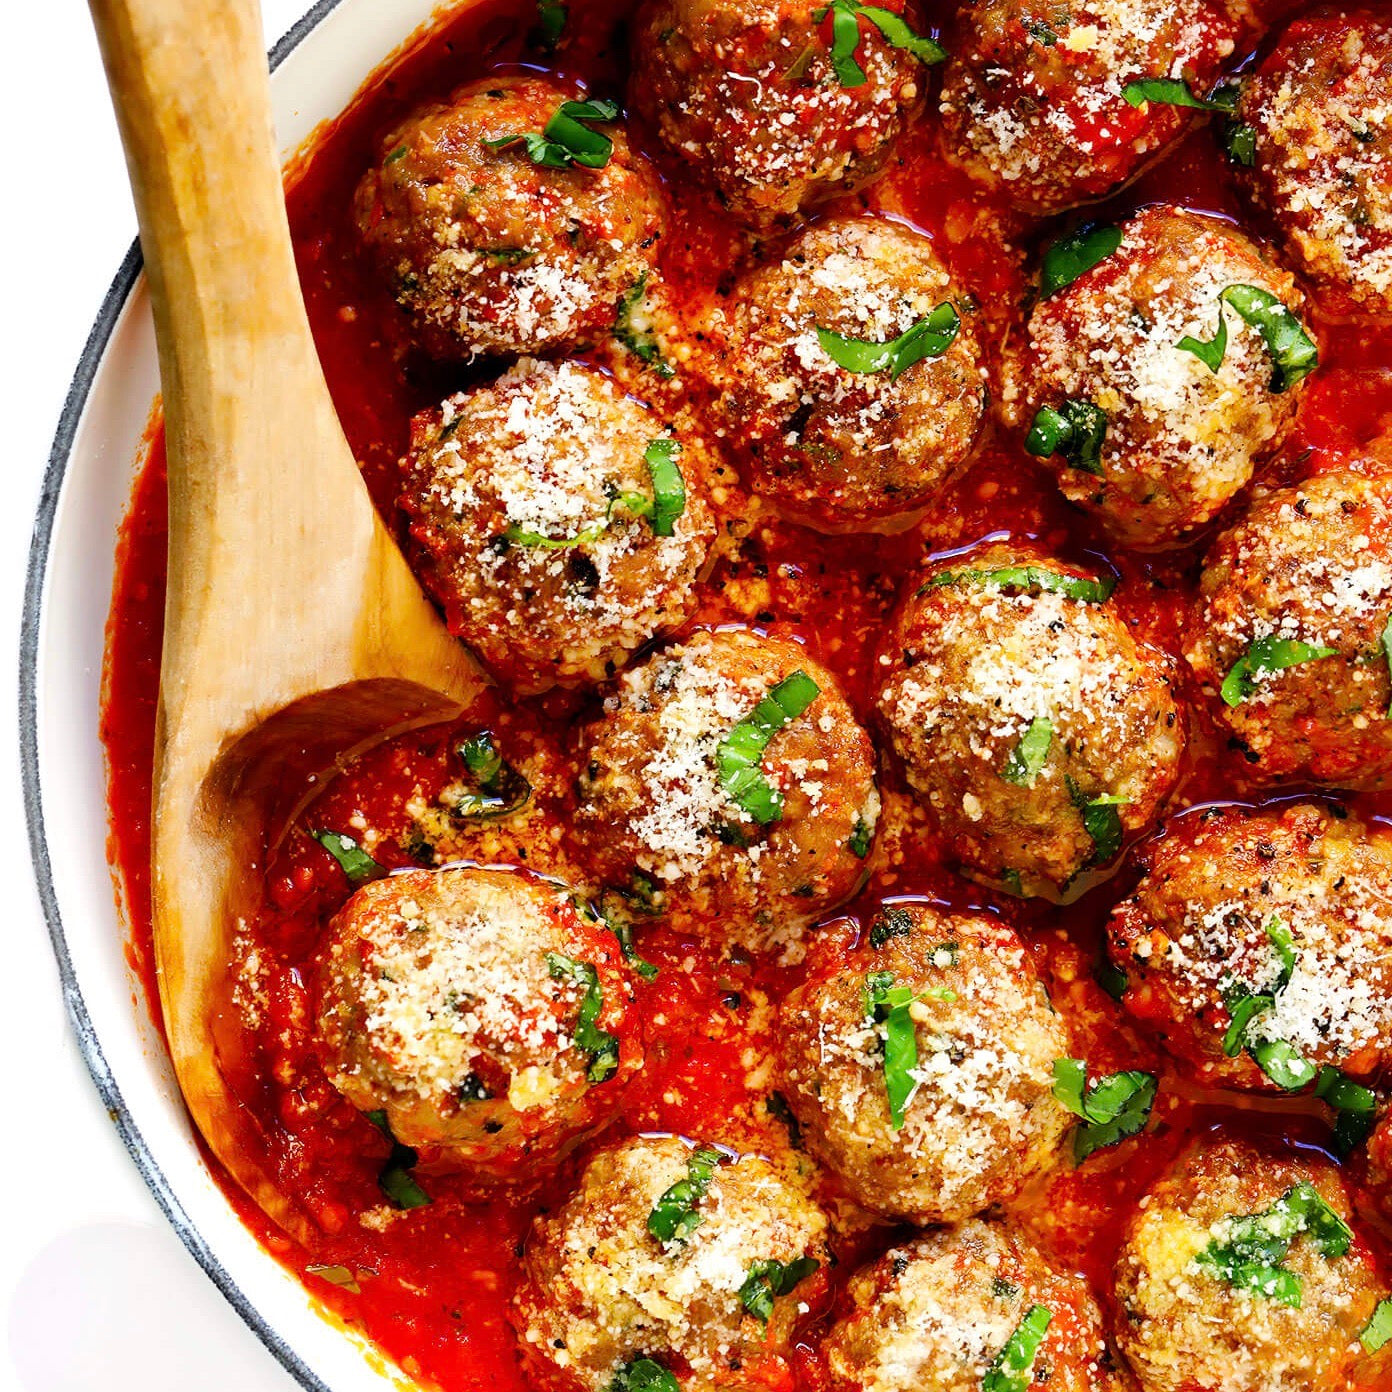 Shop Beef Meatballs in Singapore - The New Grocer